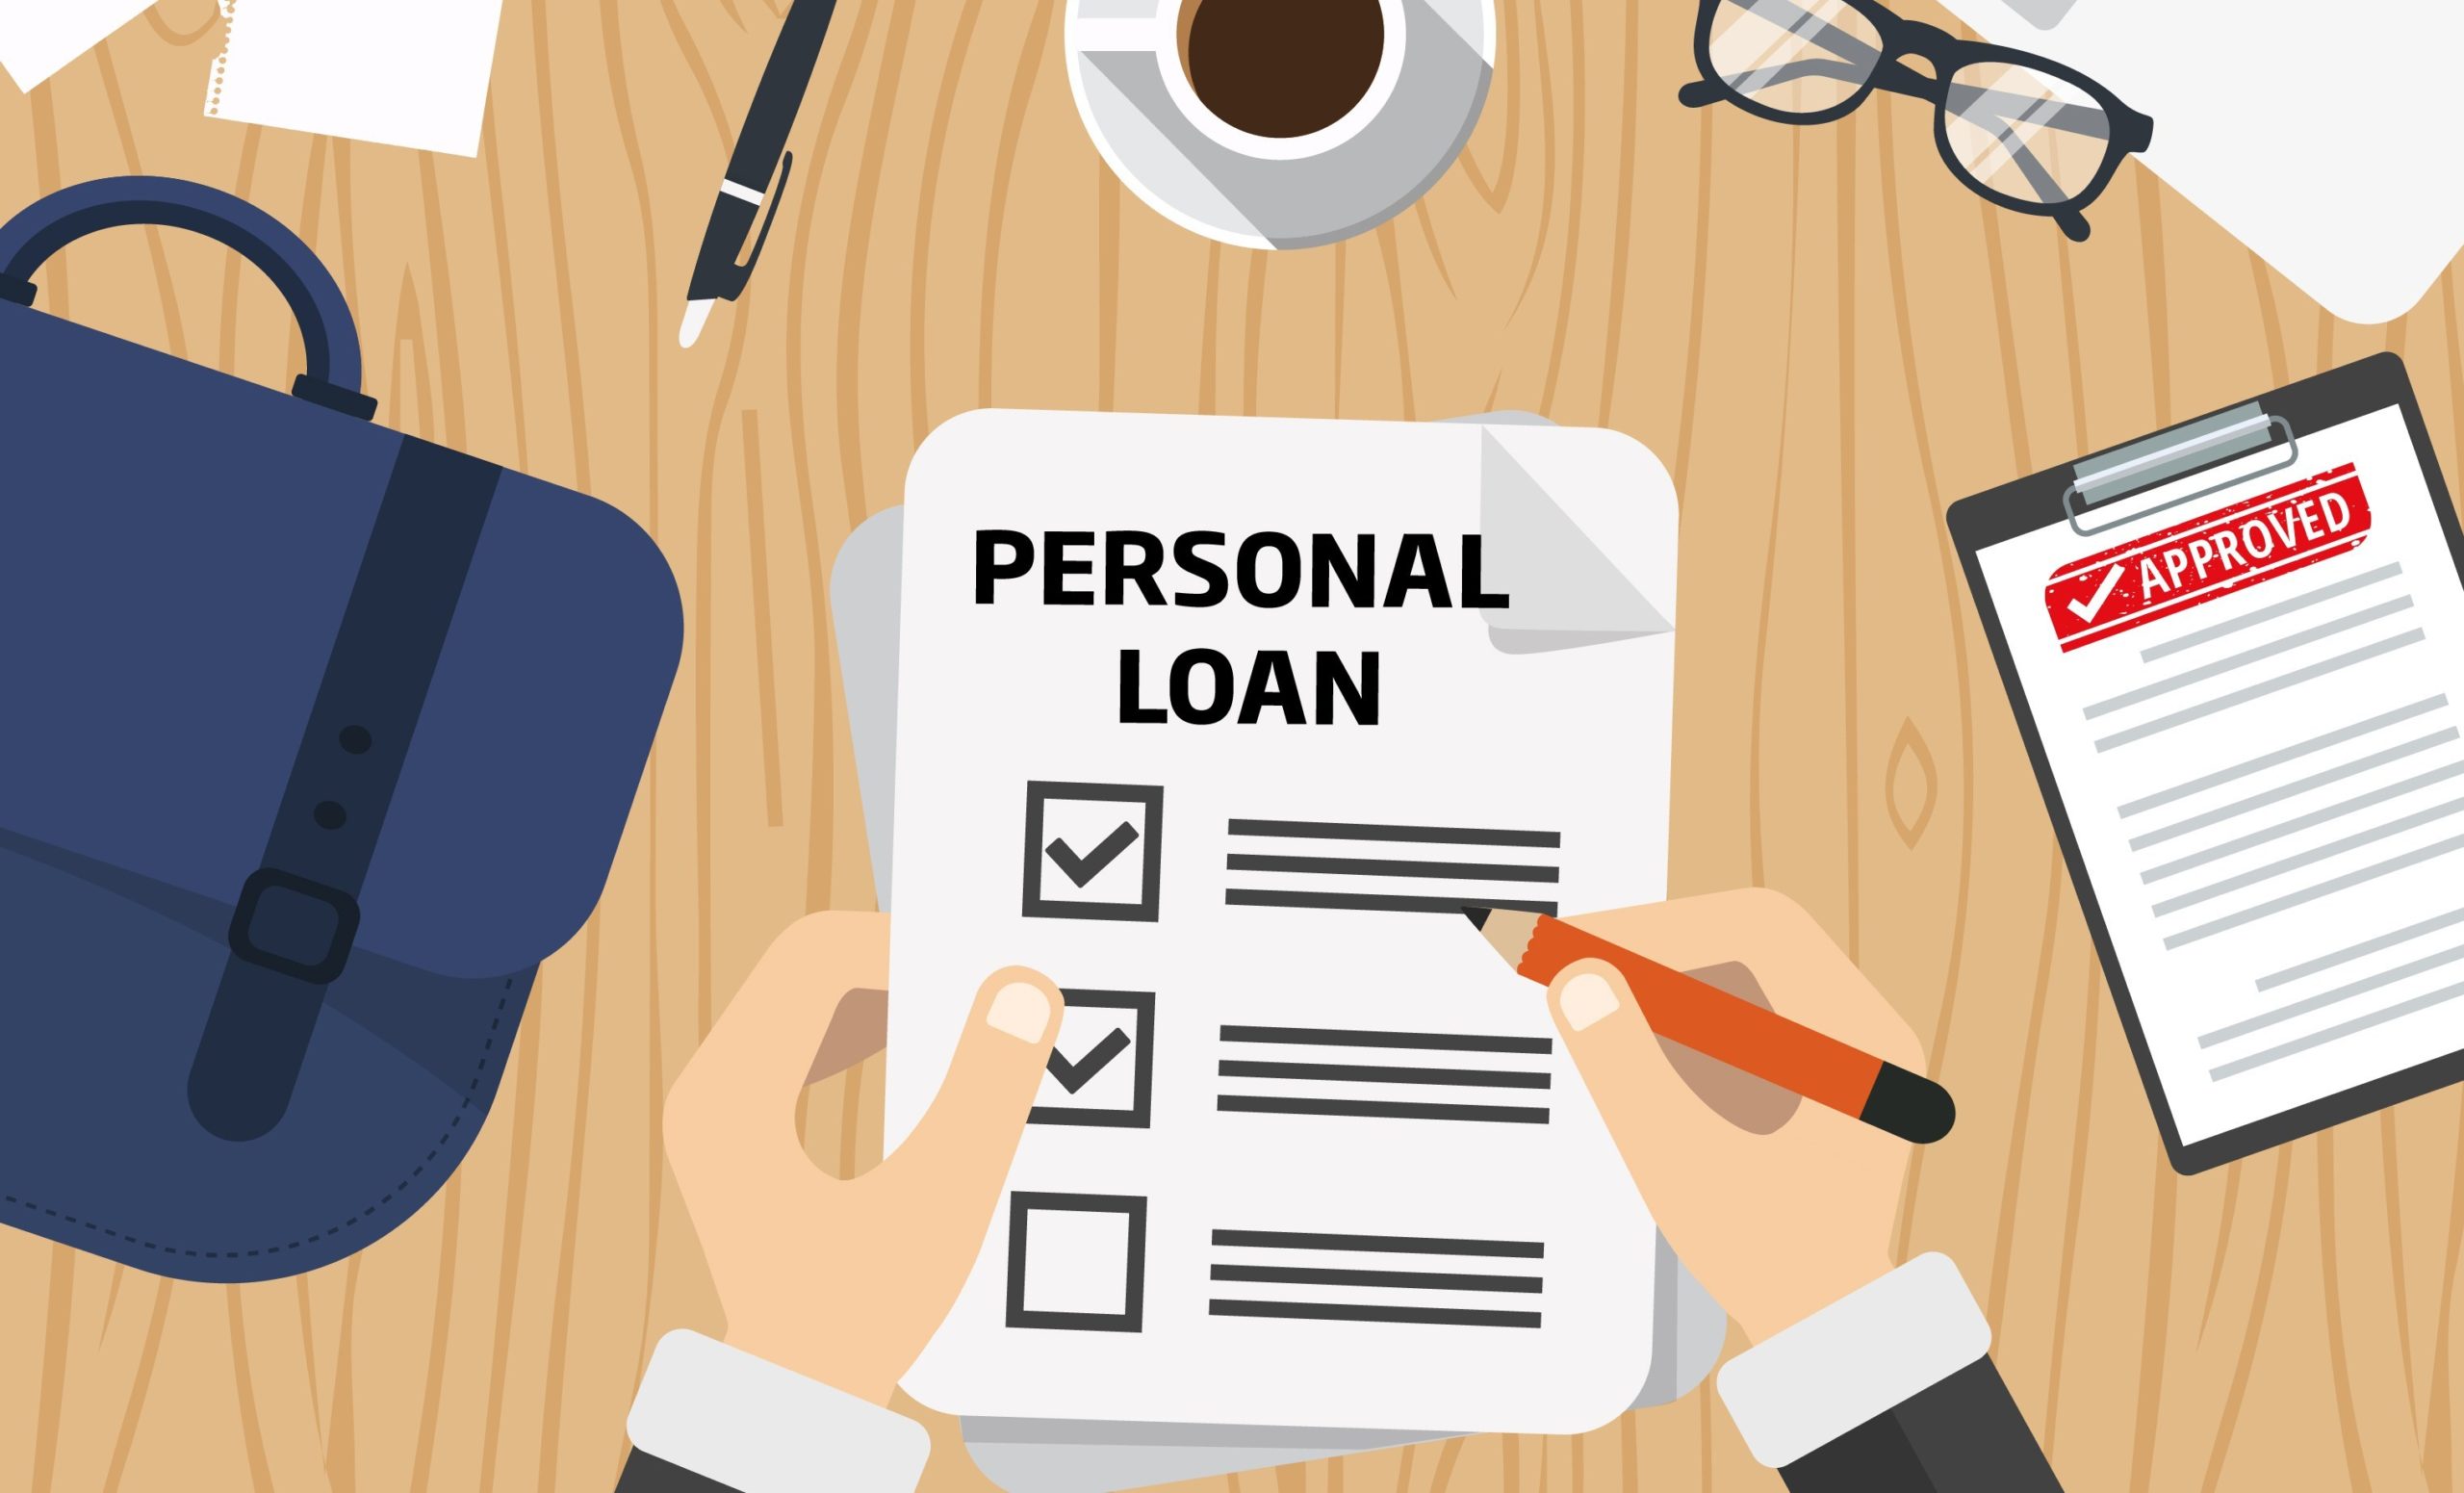 Increase Your Chances of Getting Your Personal Loan Approved